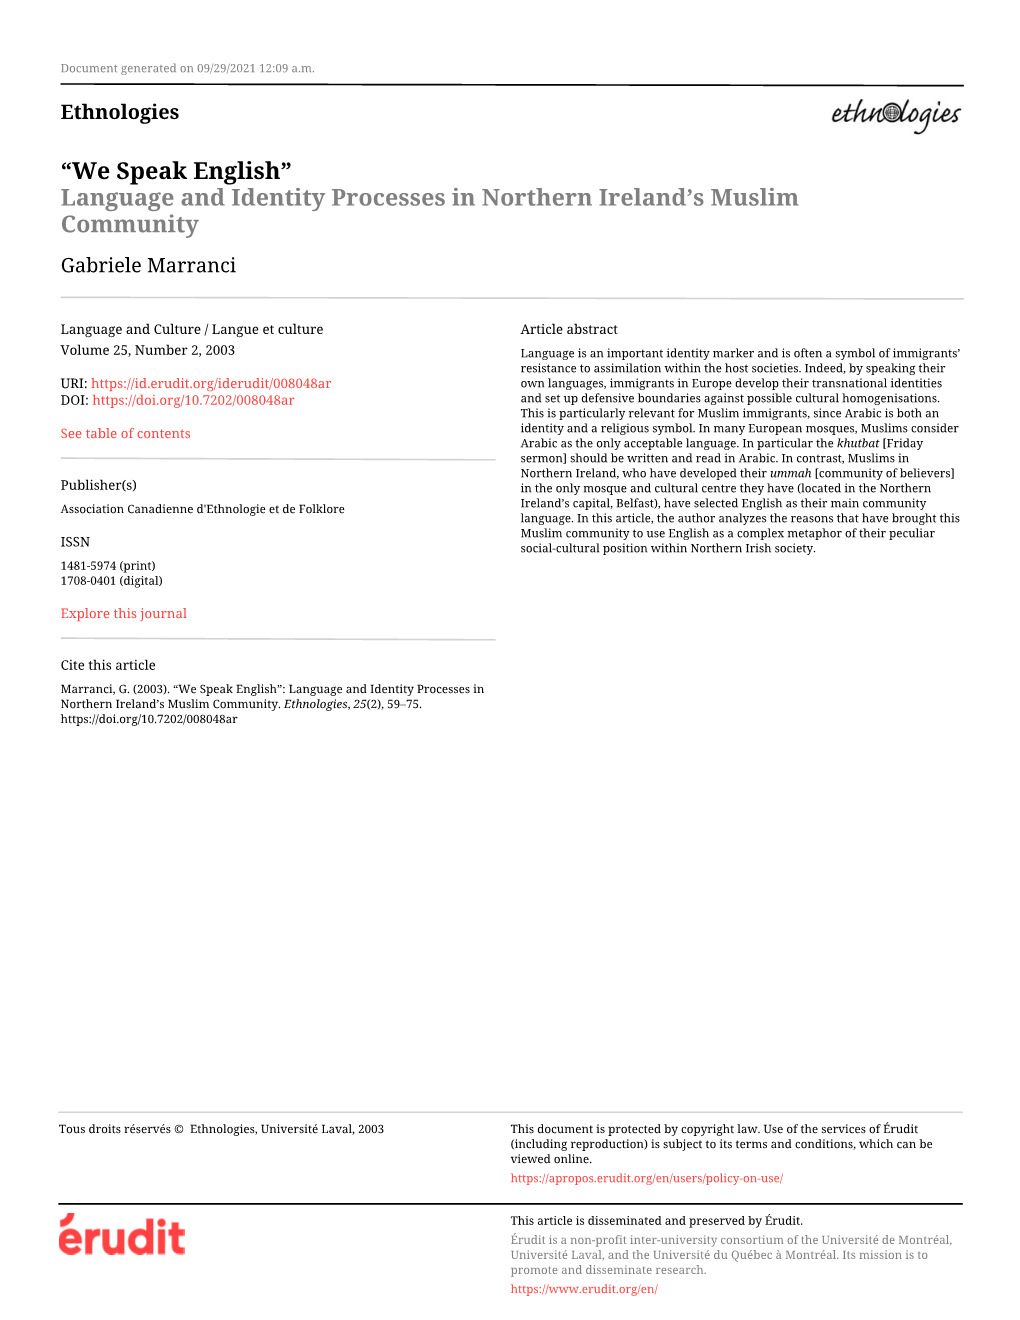 Language and Identity Processes in Northern Ireland's Muslim